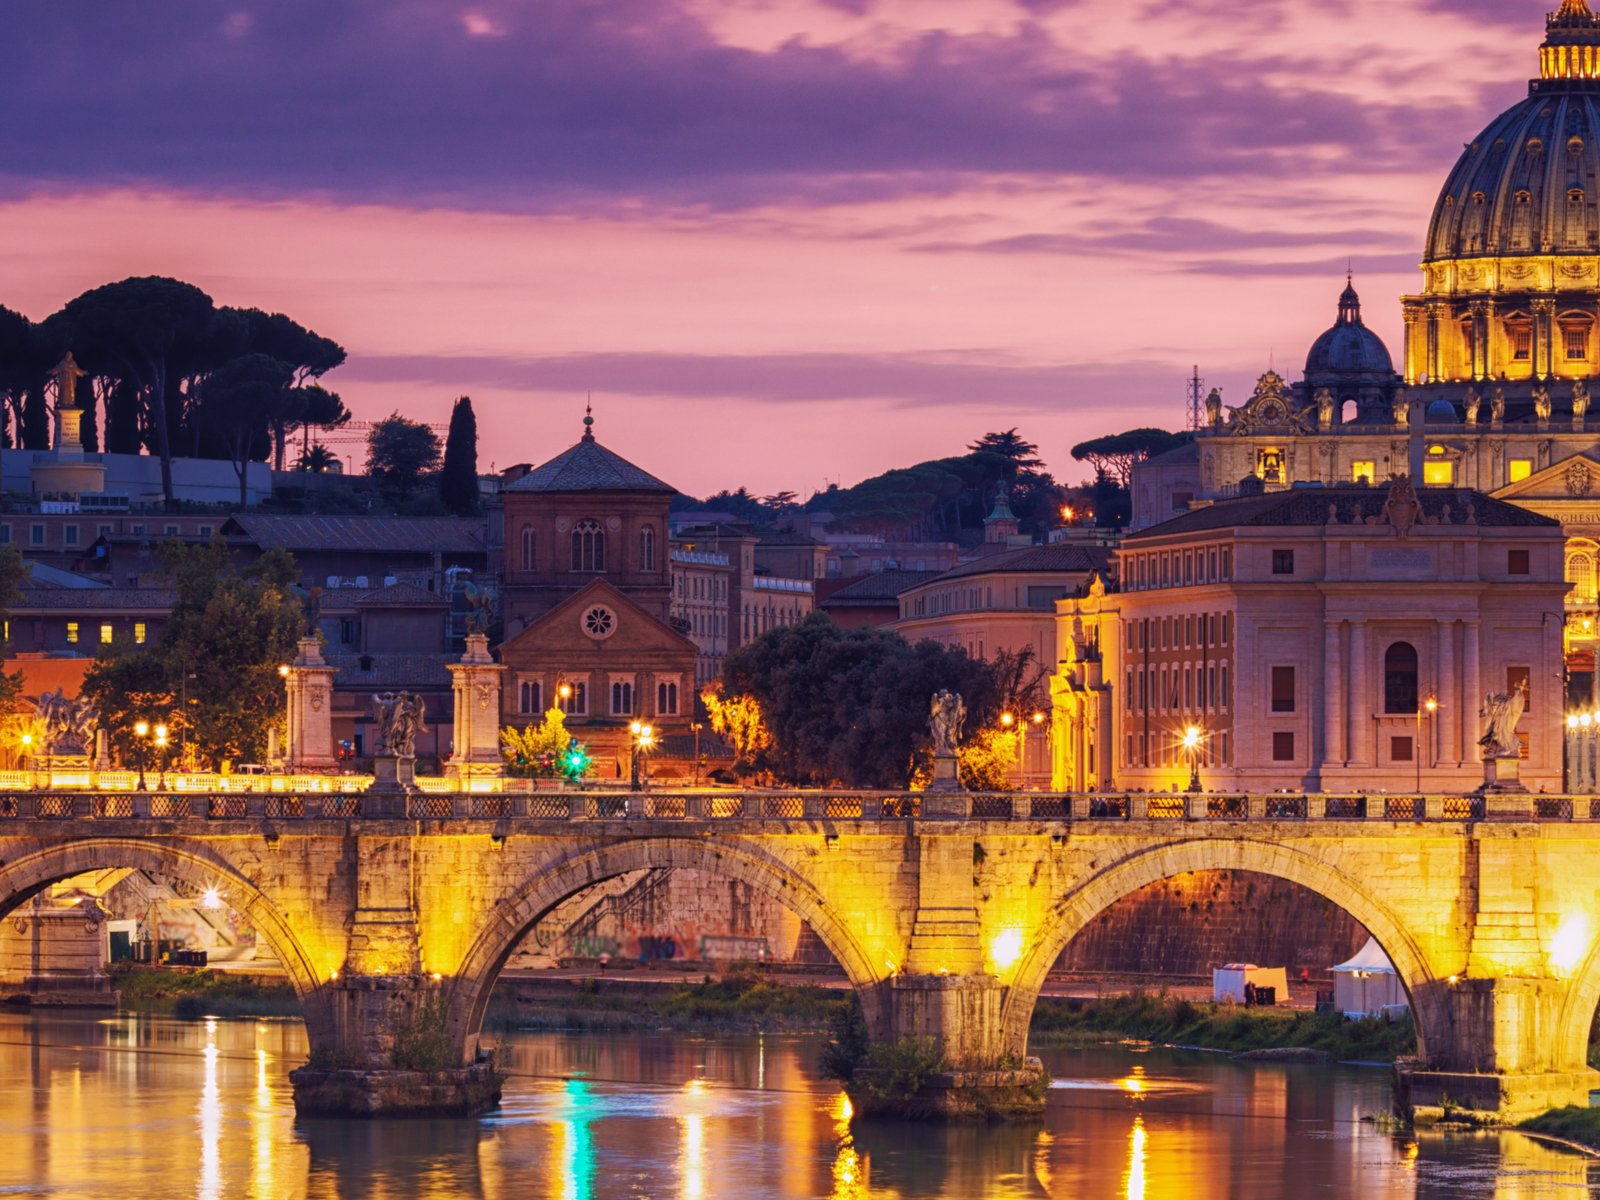 Rome is a great place for bar-hopping.